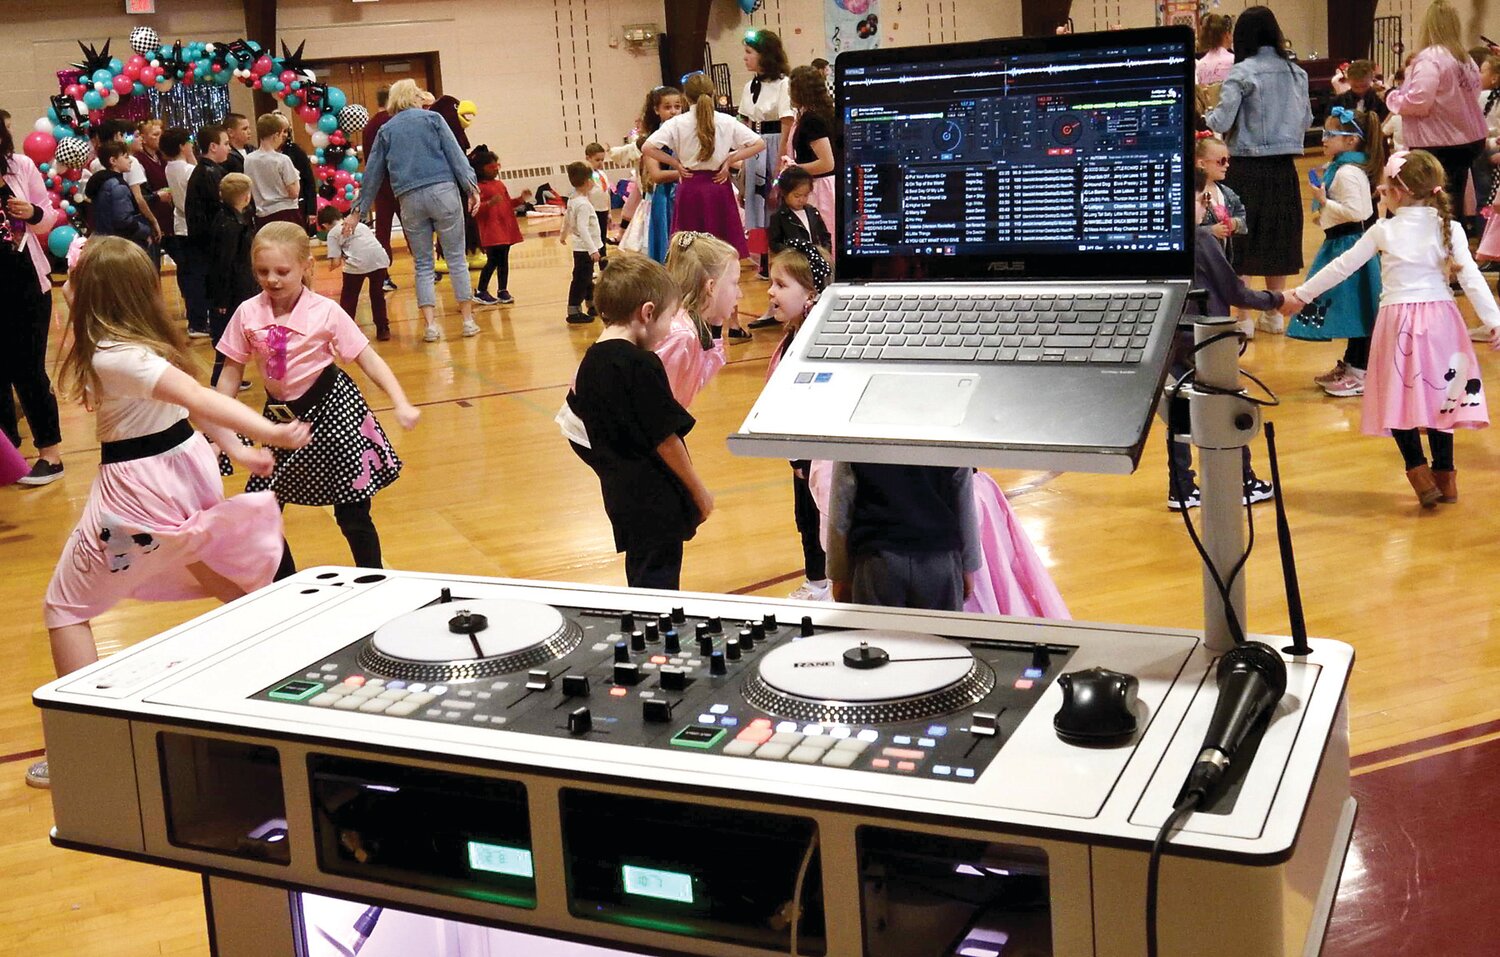 The disc jockey station for the dance.